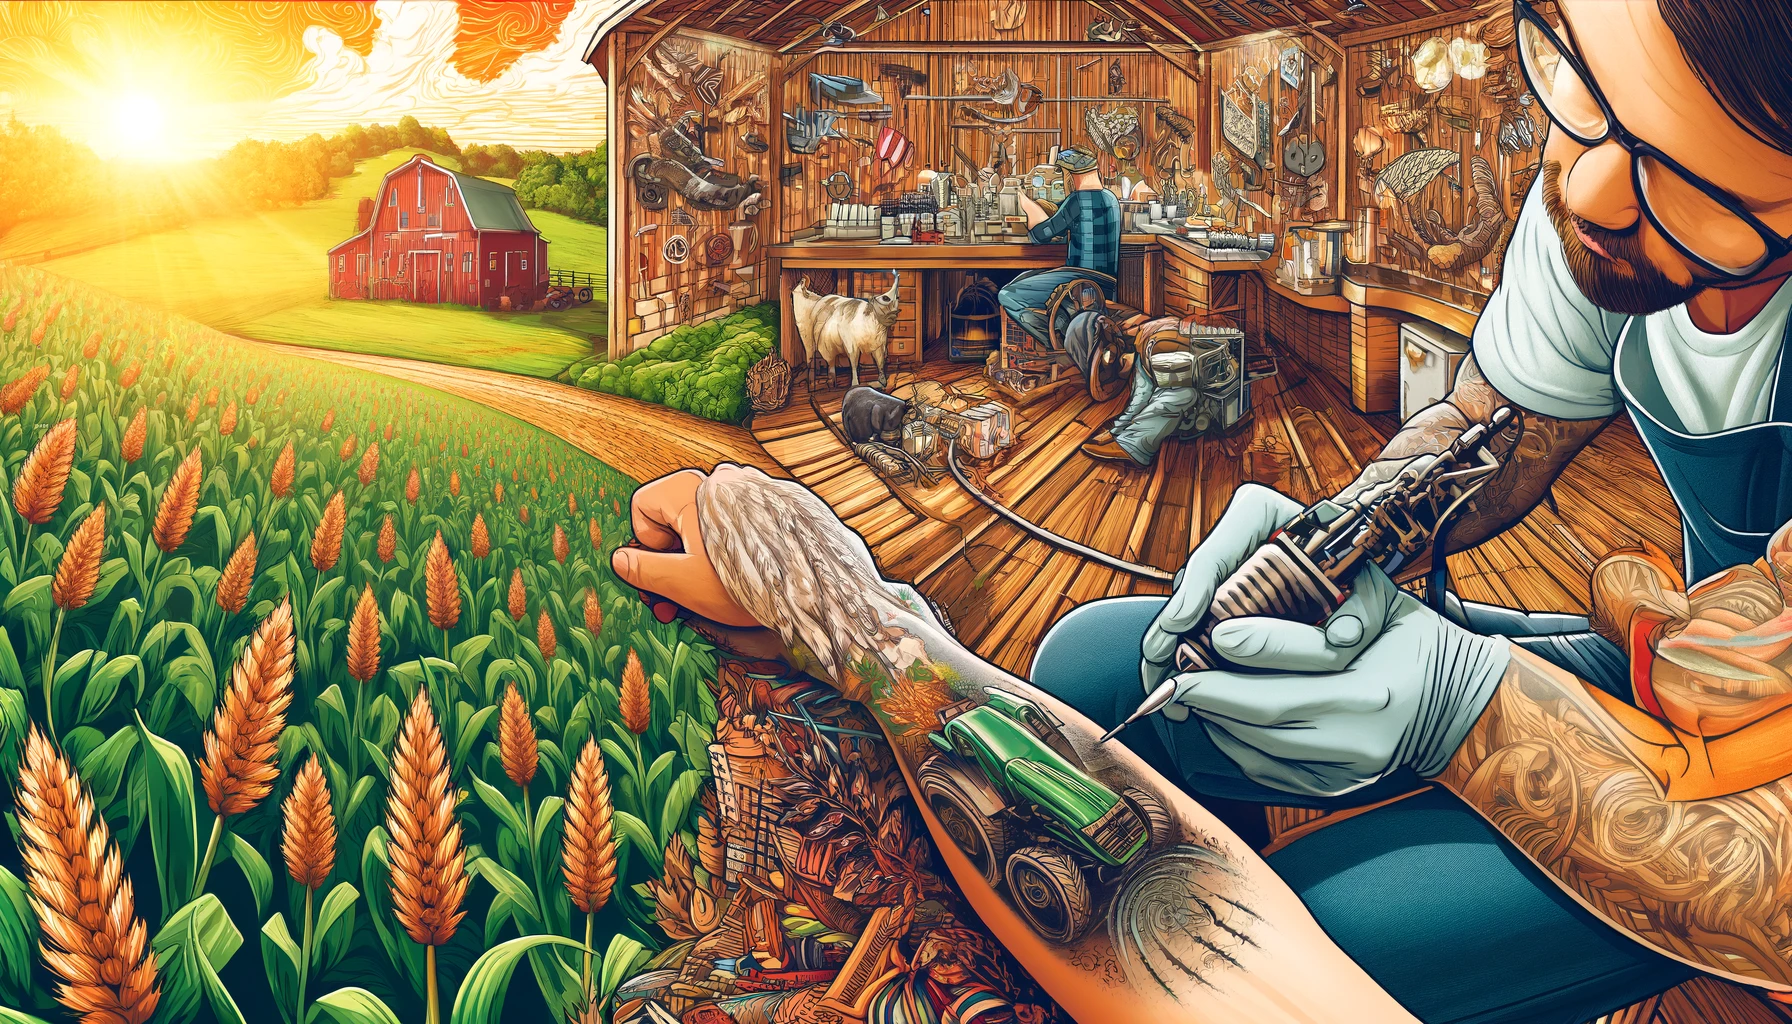 Farm and Ranch Tattoos -- A vivid and detailed closeup illustration of a farm-themed tattoo being applied on a client's arm in a rustic agricultural setting. The tatt4